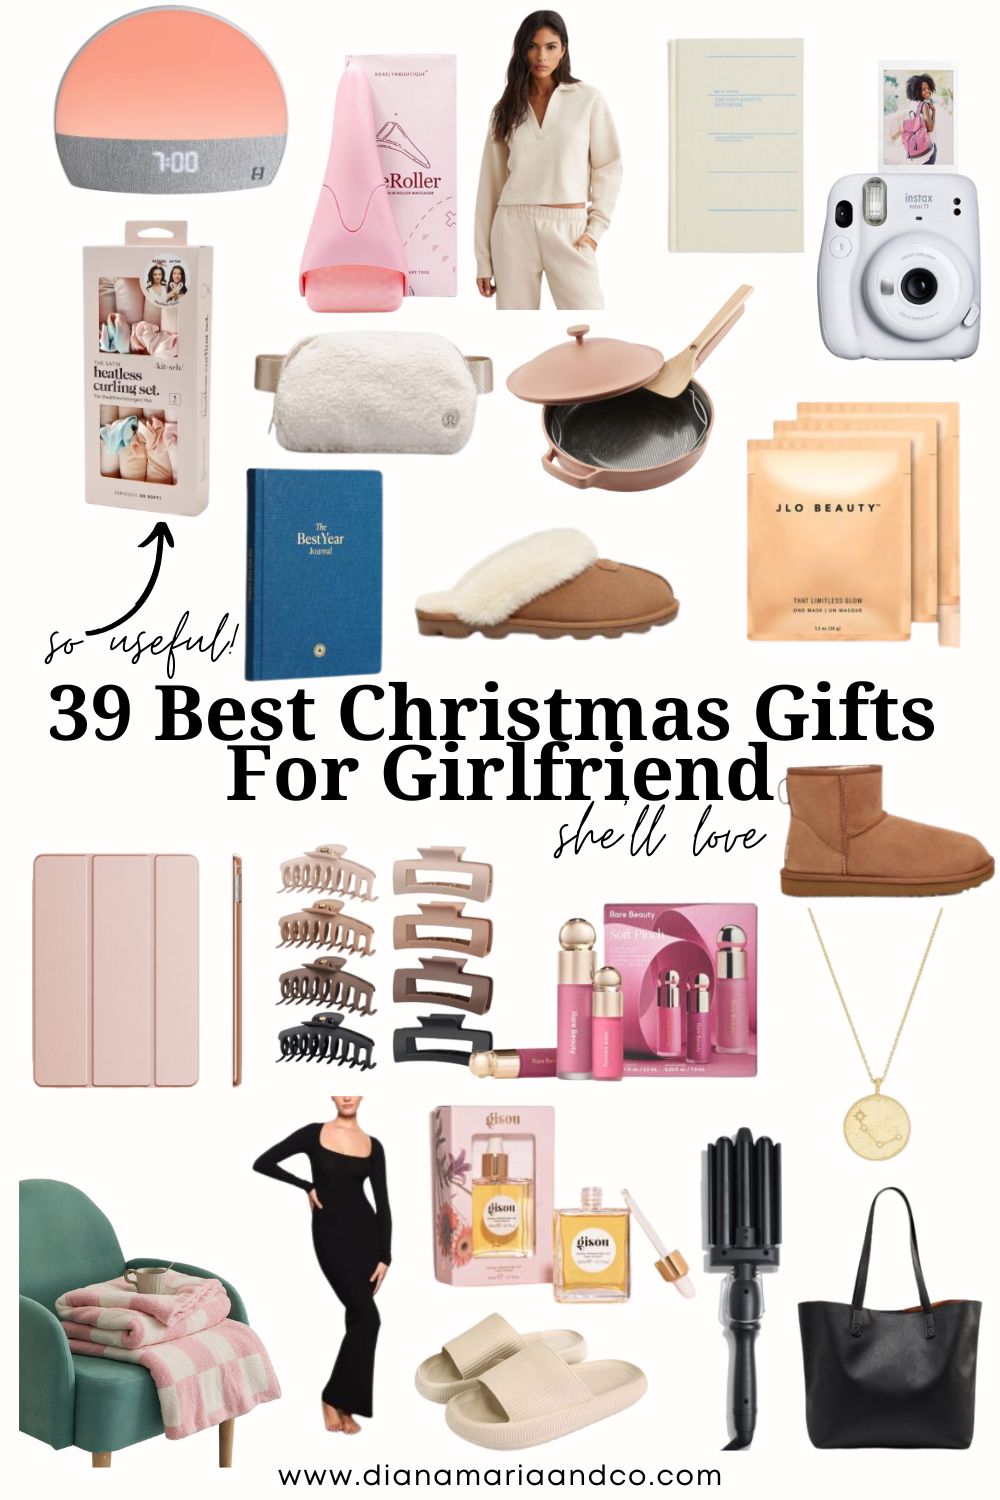 The Best Christmas Gifts Under $25 That Are Totally Worth It